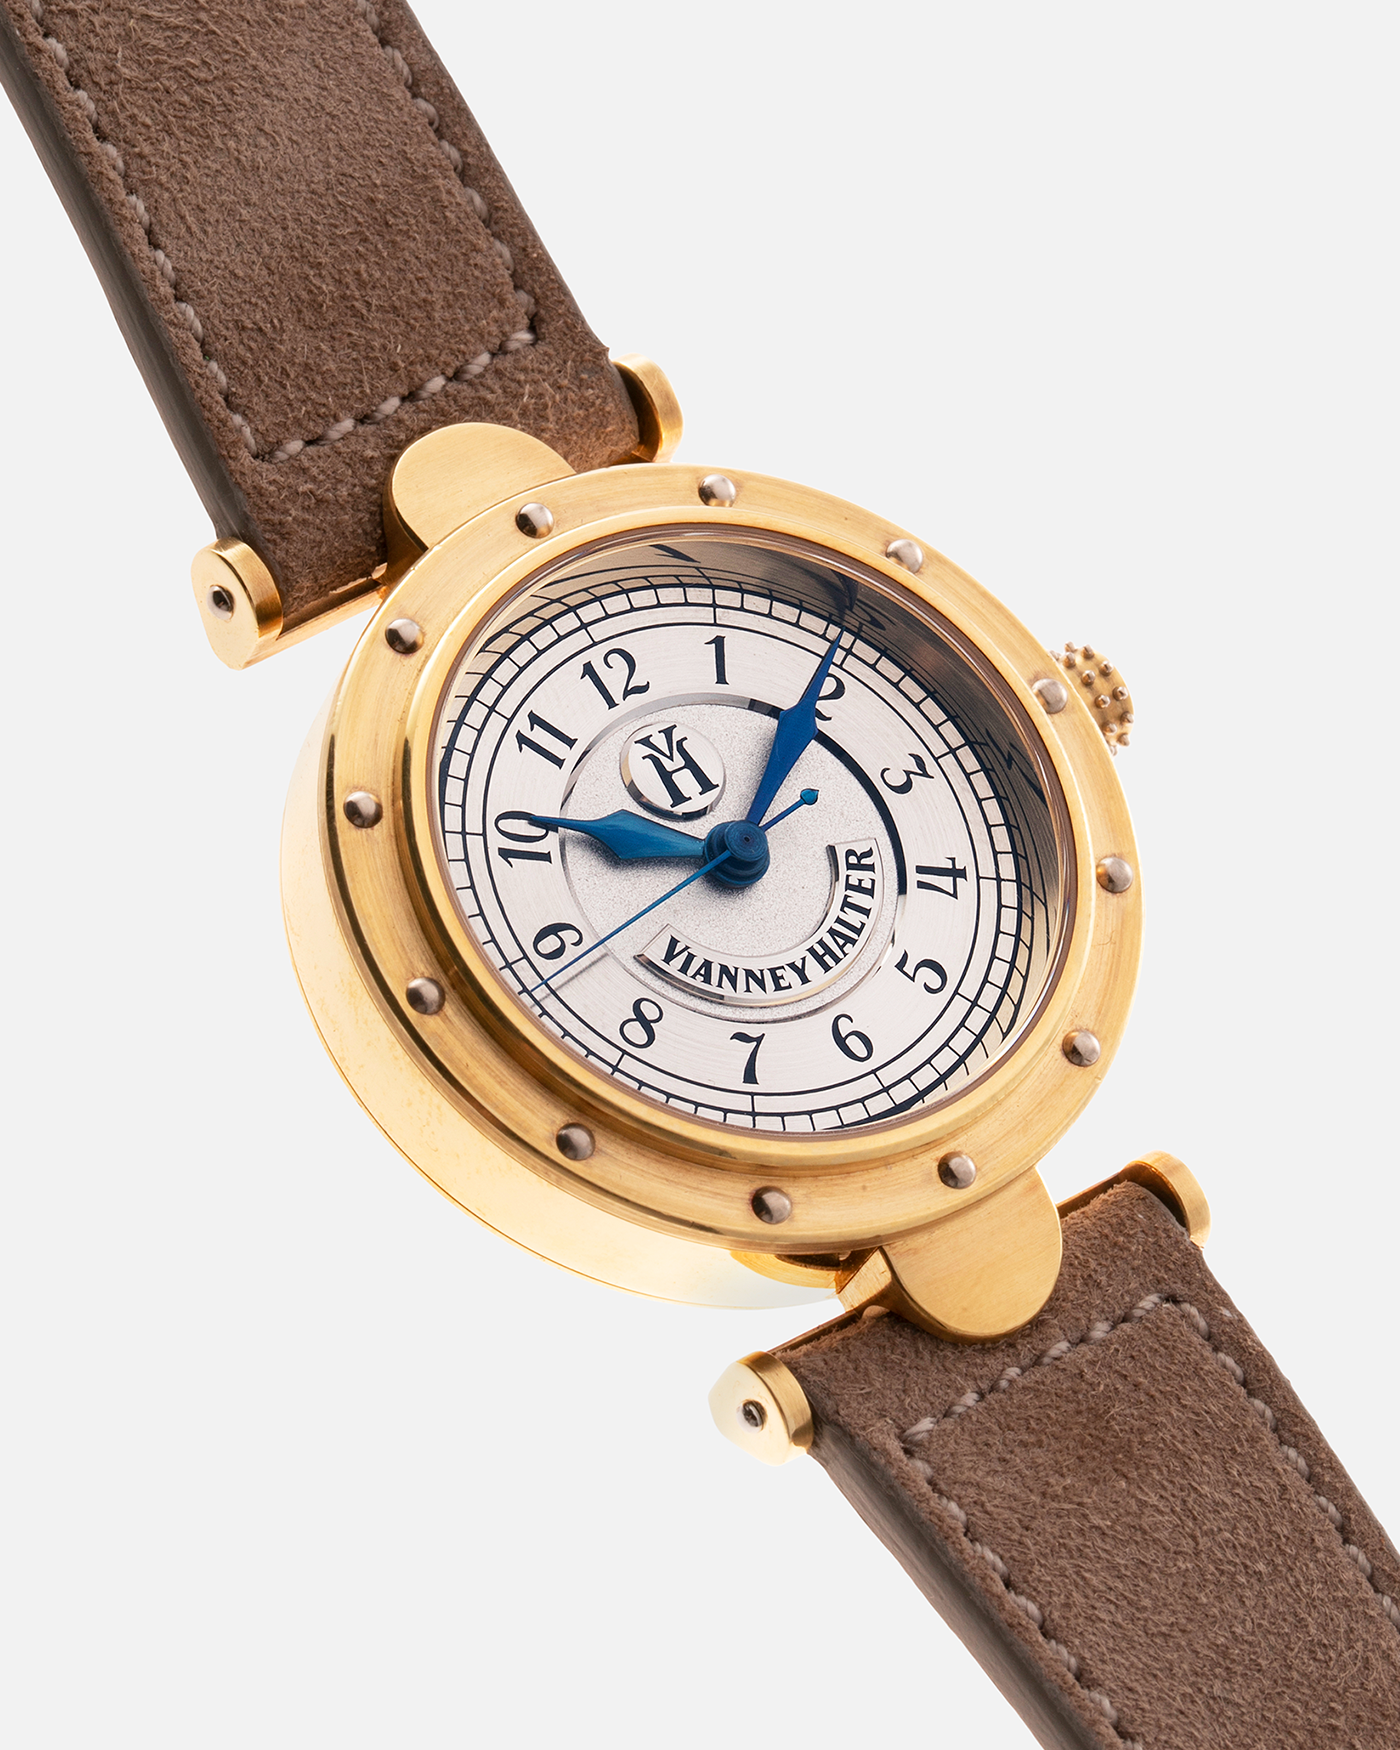 Brand: Vianney Halter Year: 2000’s Model: Classic Material: 18k Yellow Gold Movement: Modified Lemania 8810 with mystery motor Case Diameter: 36mm Bracelet/Strap: Molequin Beige Suede with matching Yellow Gold Buckle